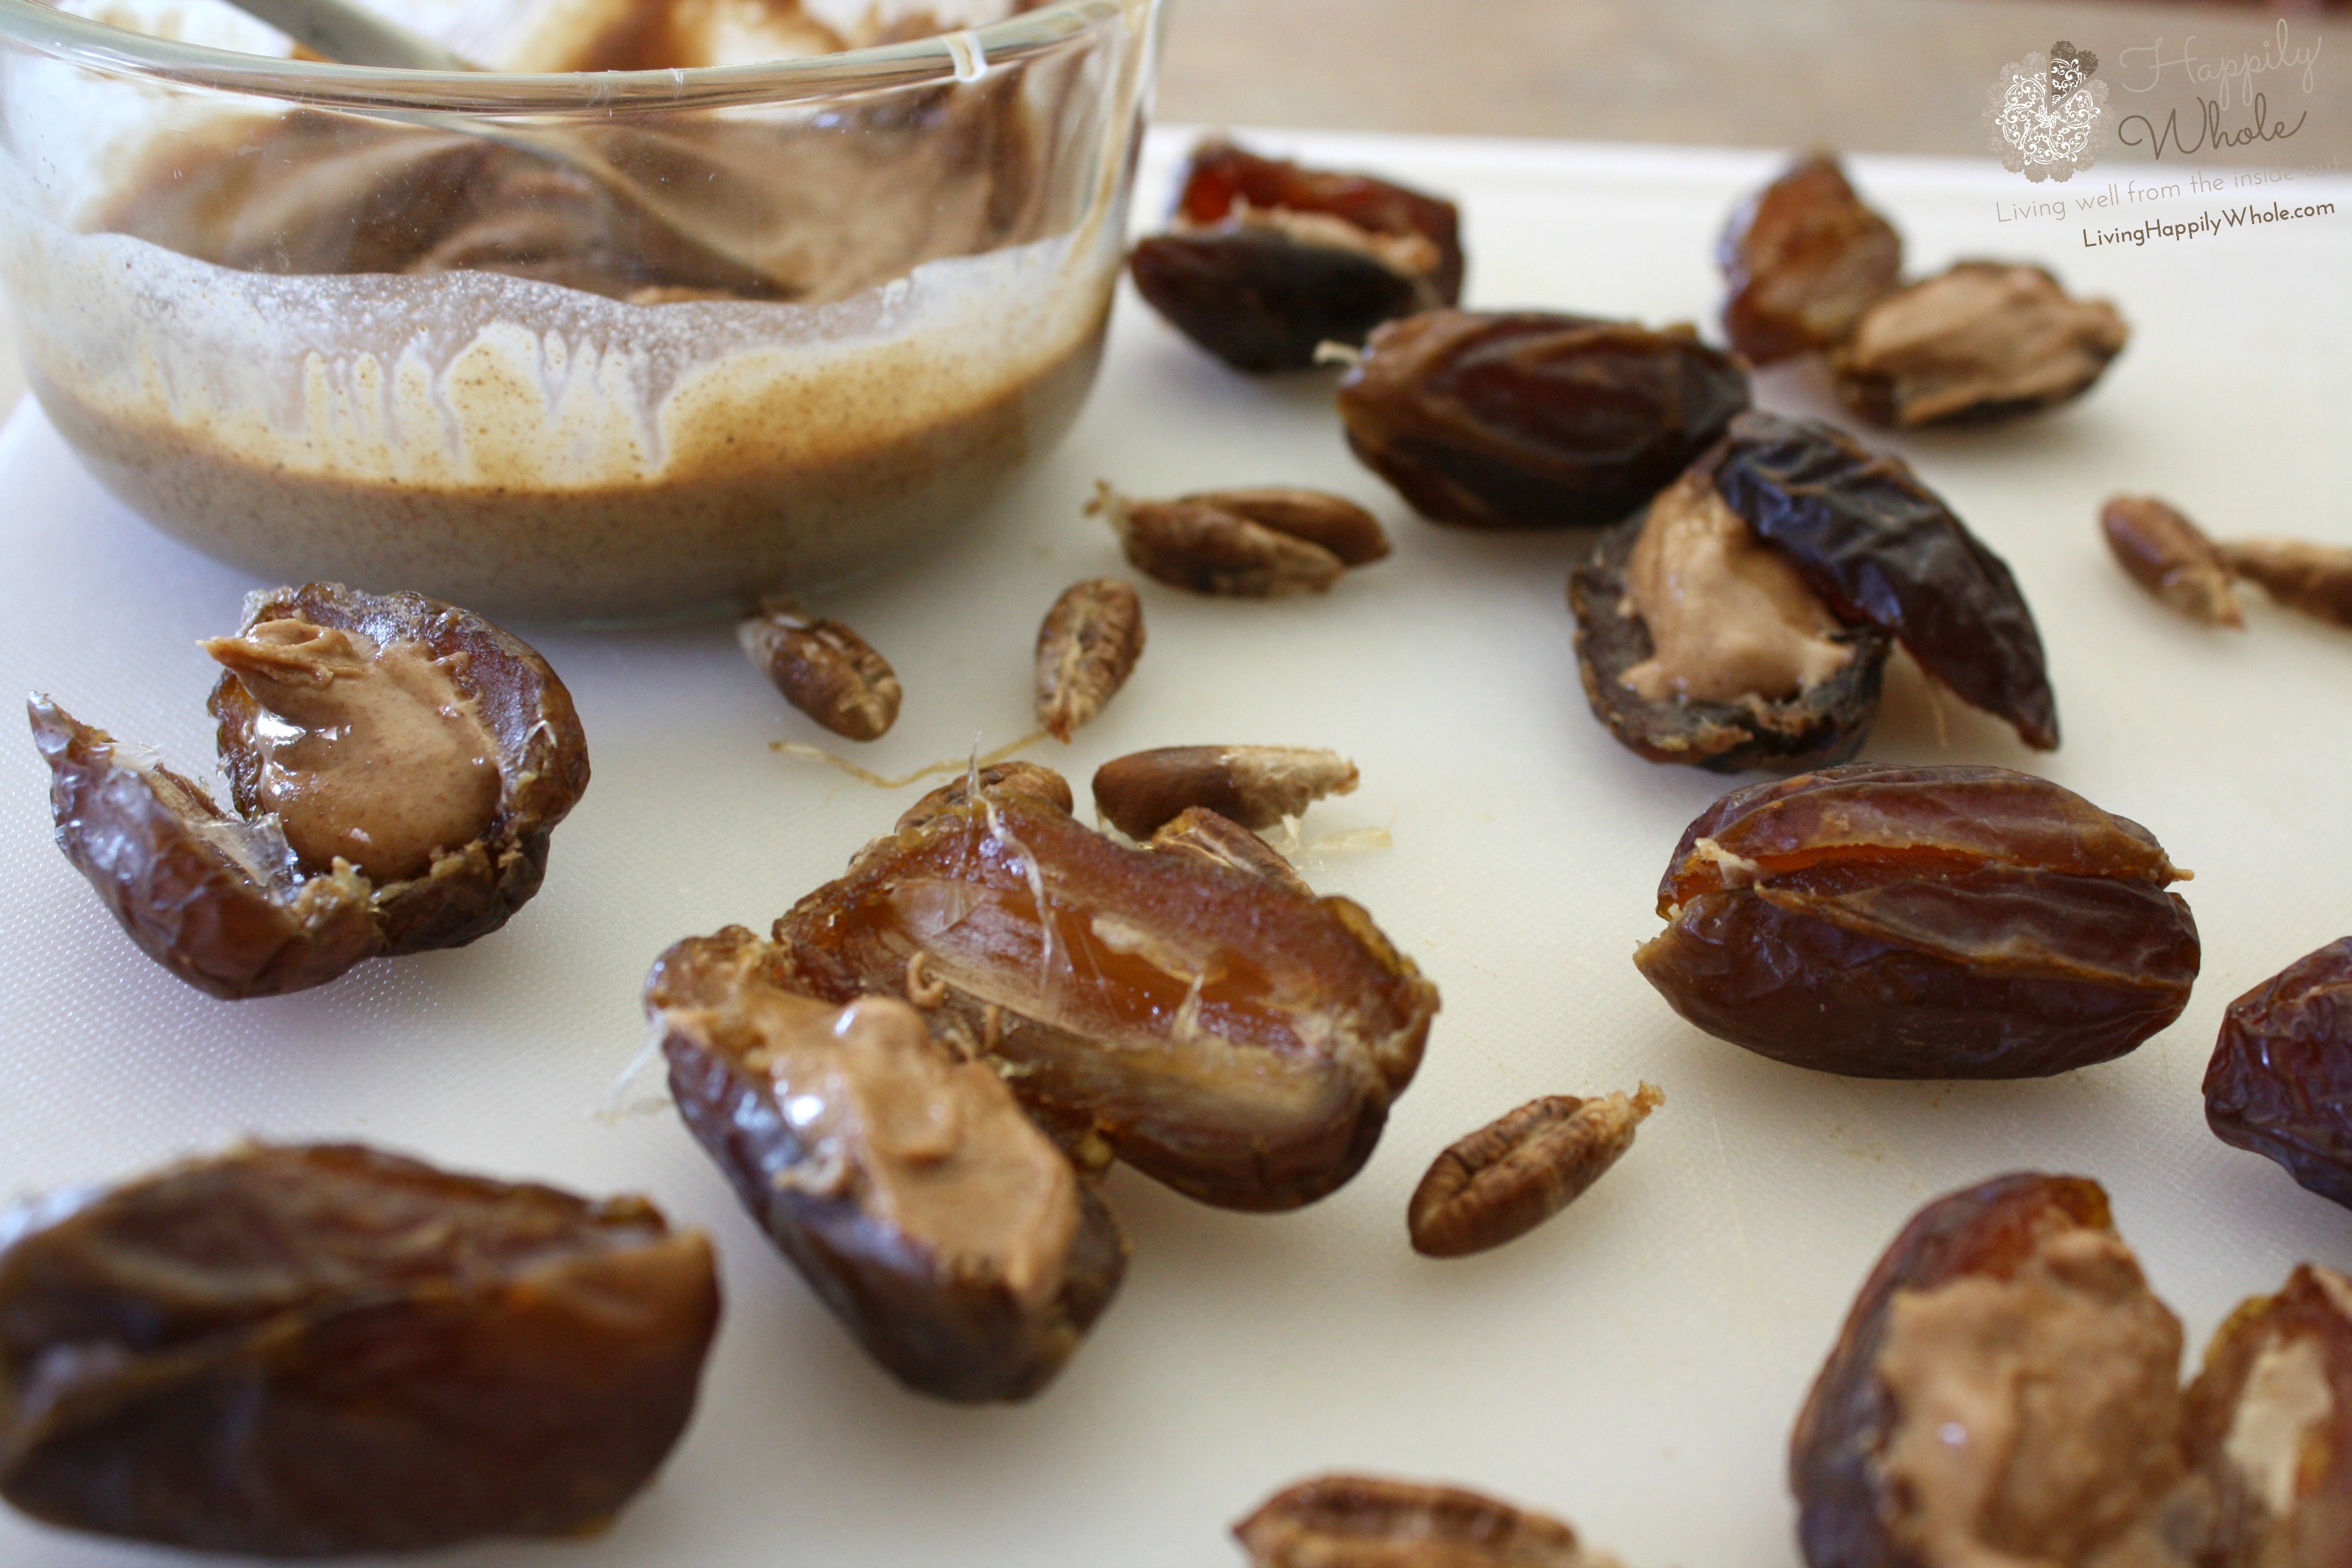 Decadent Dates-stuffed with almond butter